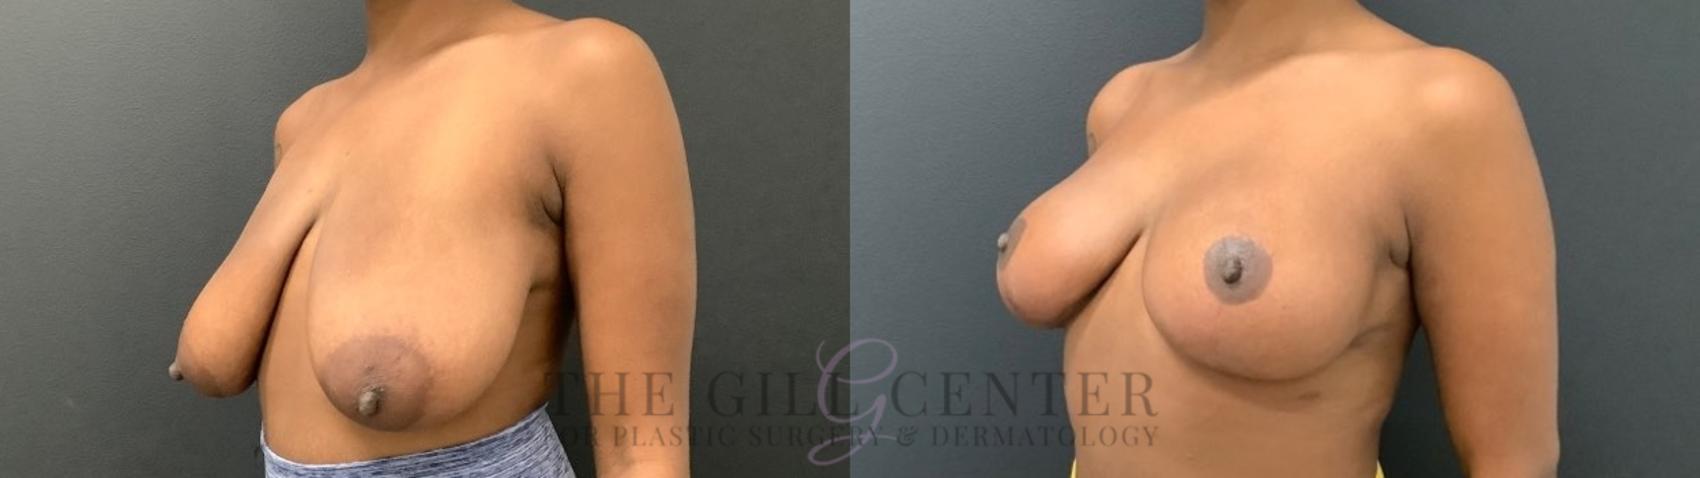 Breast Lift Case 491 Before & After Left Oblique | The Woodlands, TX | The Gill Center for Plastic Surgery and Dermatology